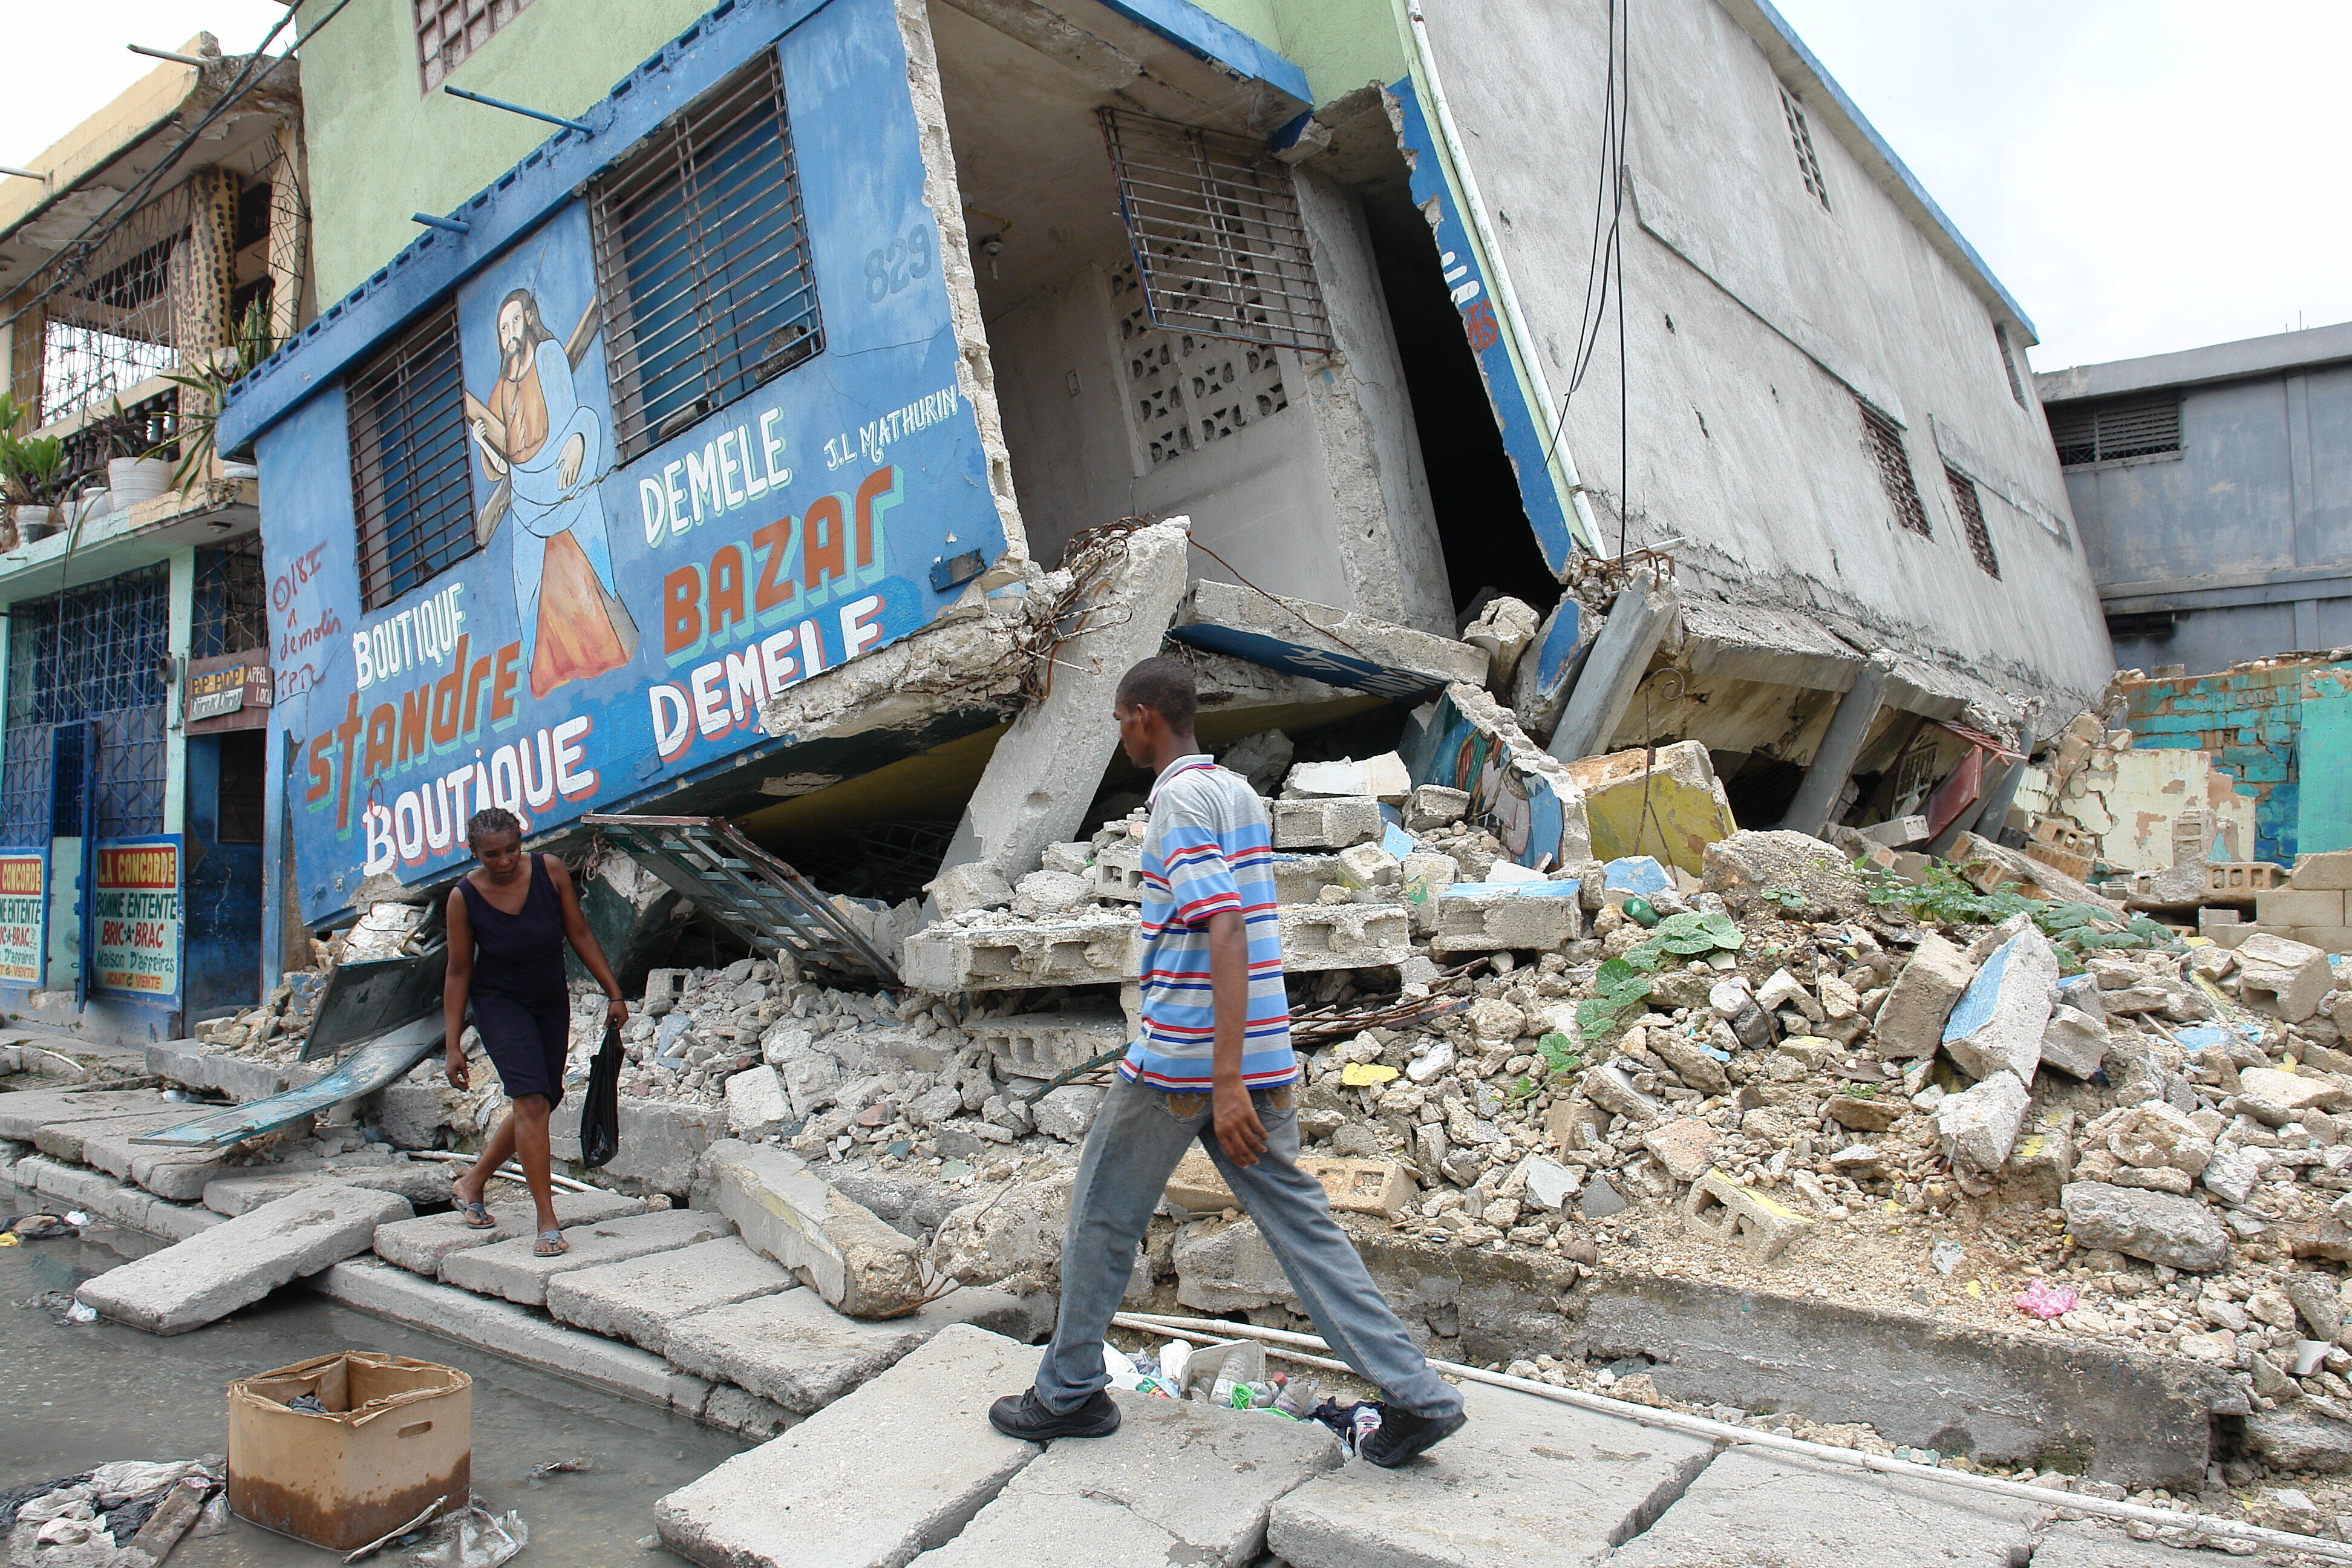 A man and a woman walk carefully on a damaged sidewalk past collapsed buildings in Port-au-Prince, Haiti after the 2010 earthquake.